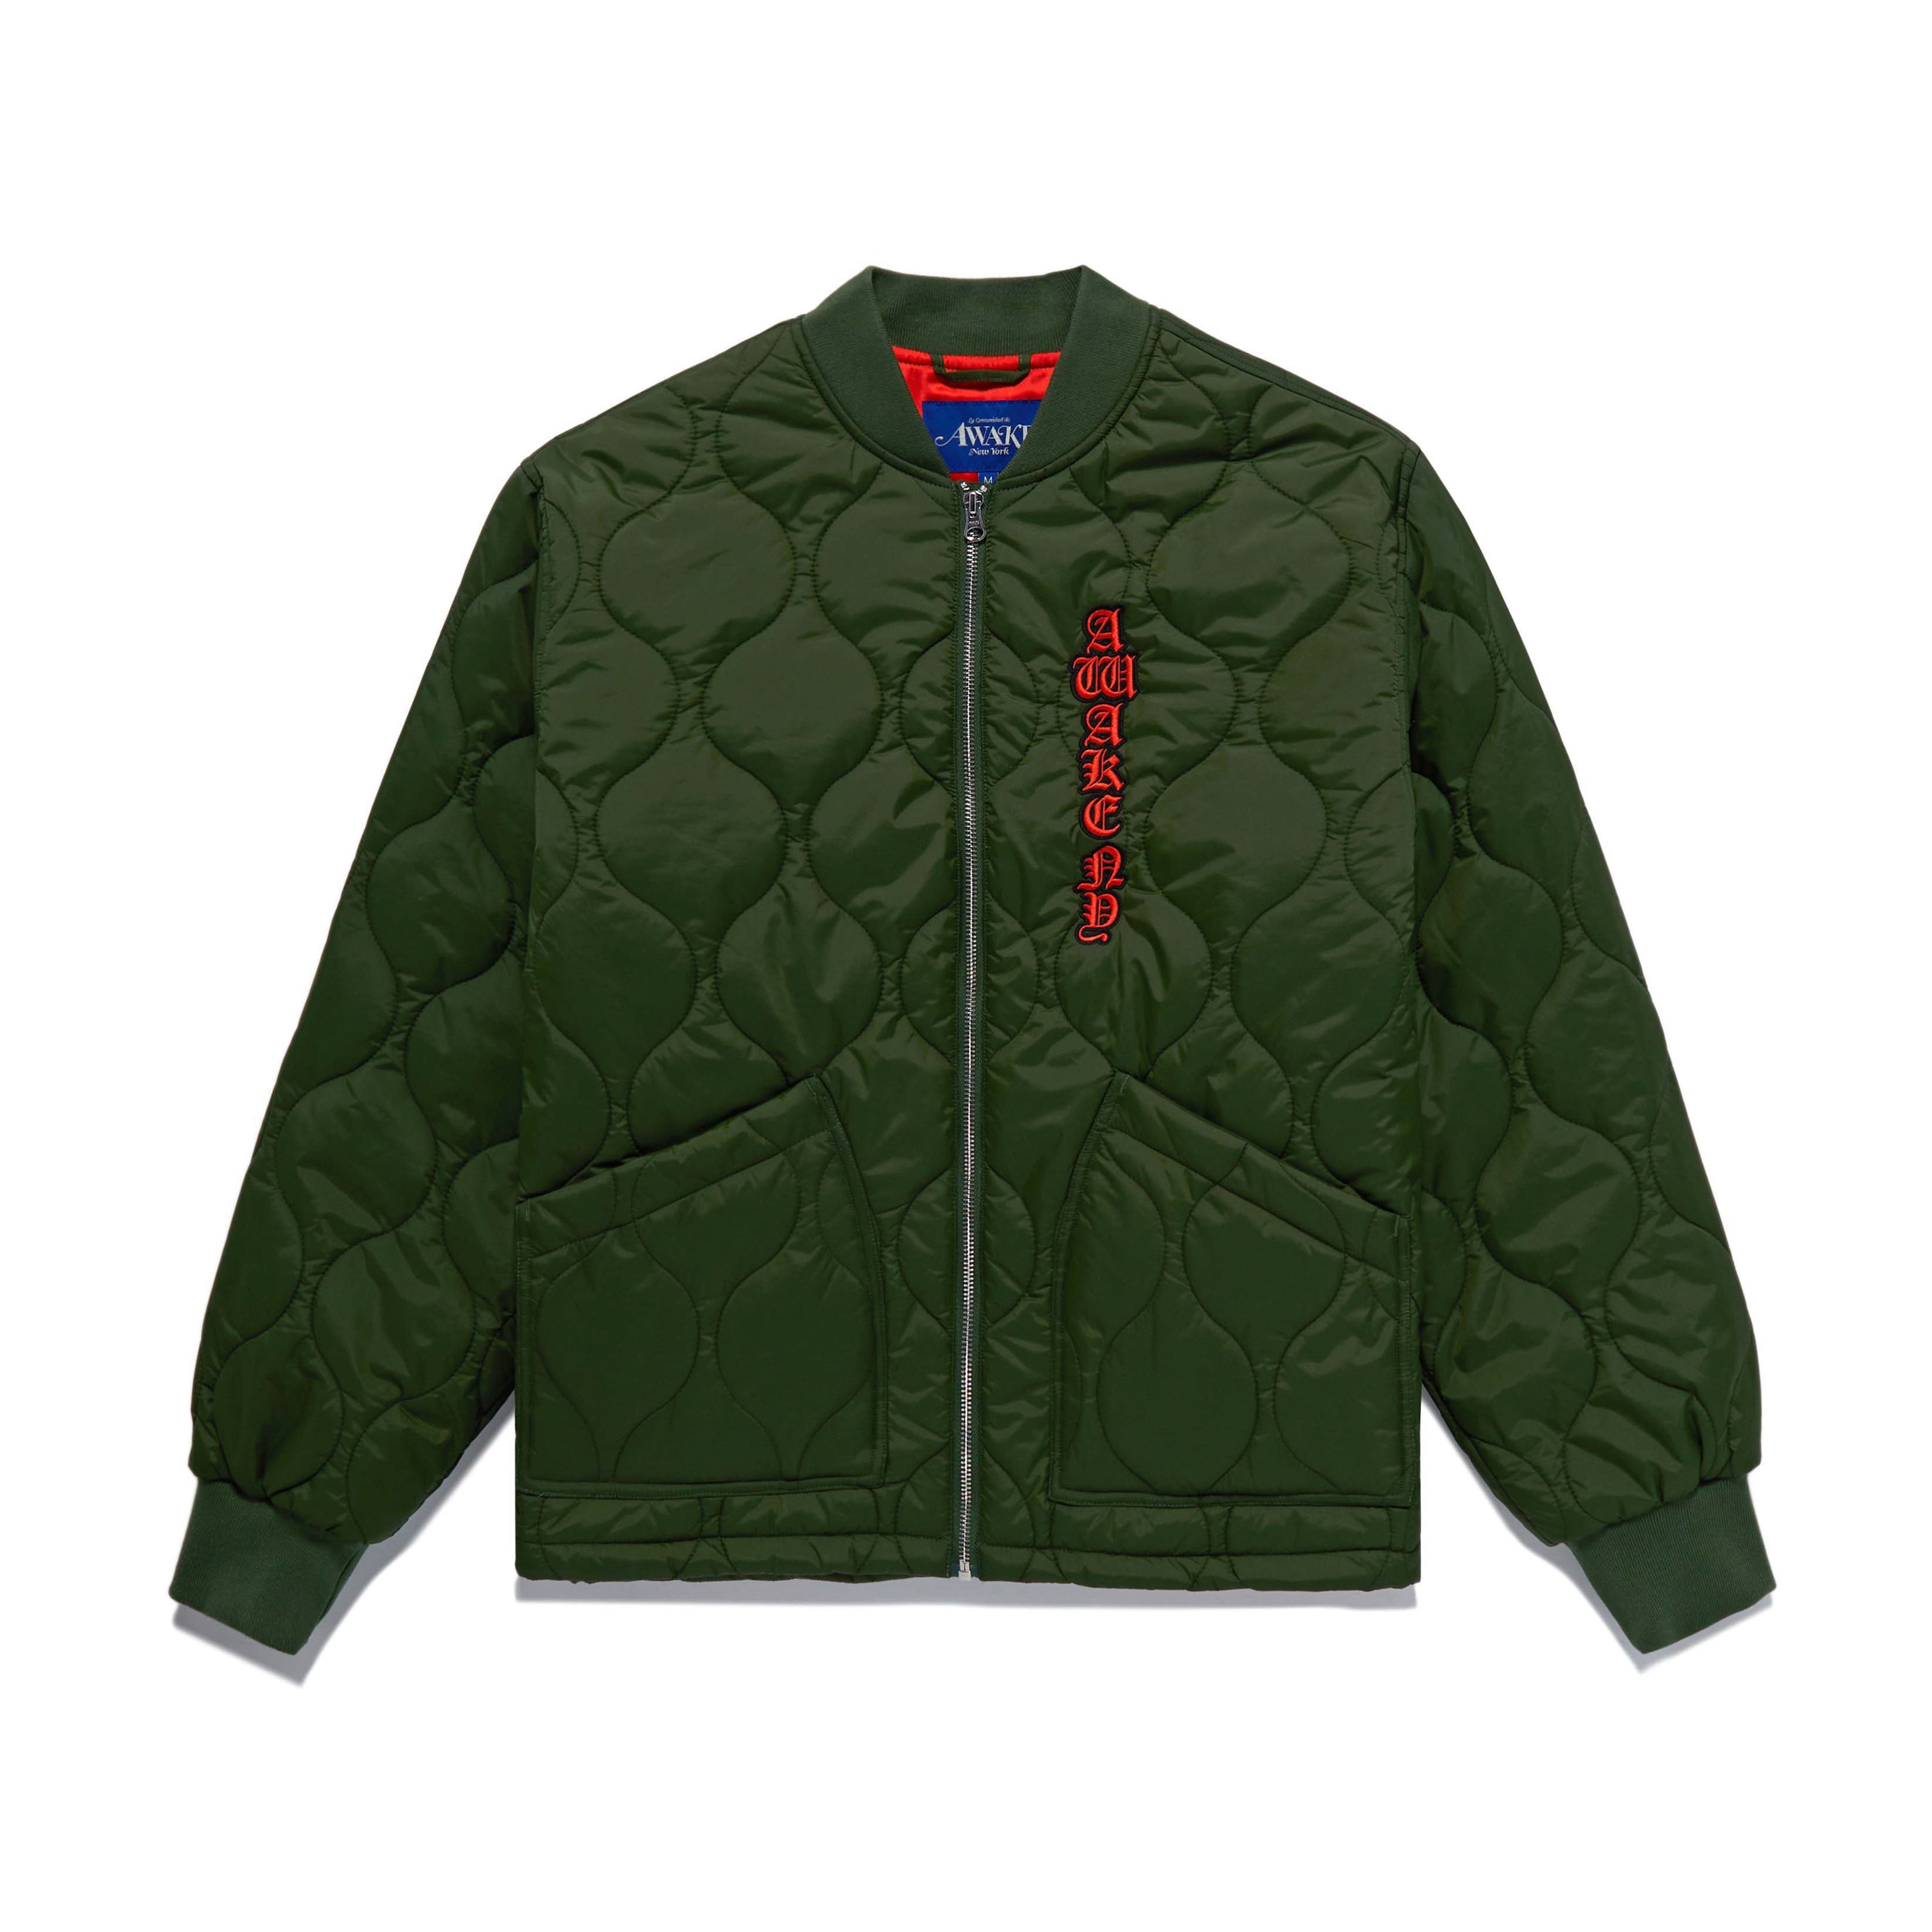 Cobra Embroidered Quilted Bomber Jacket